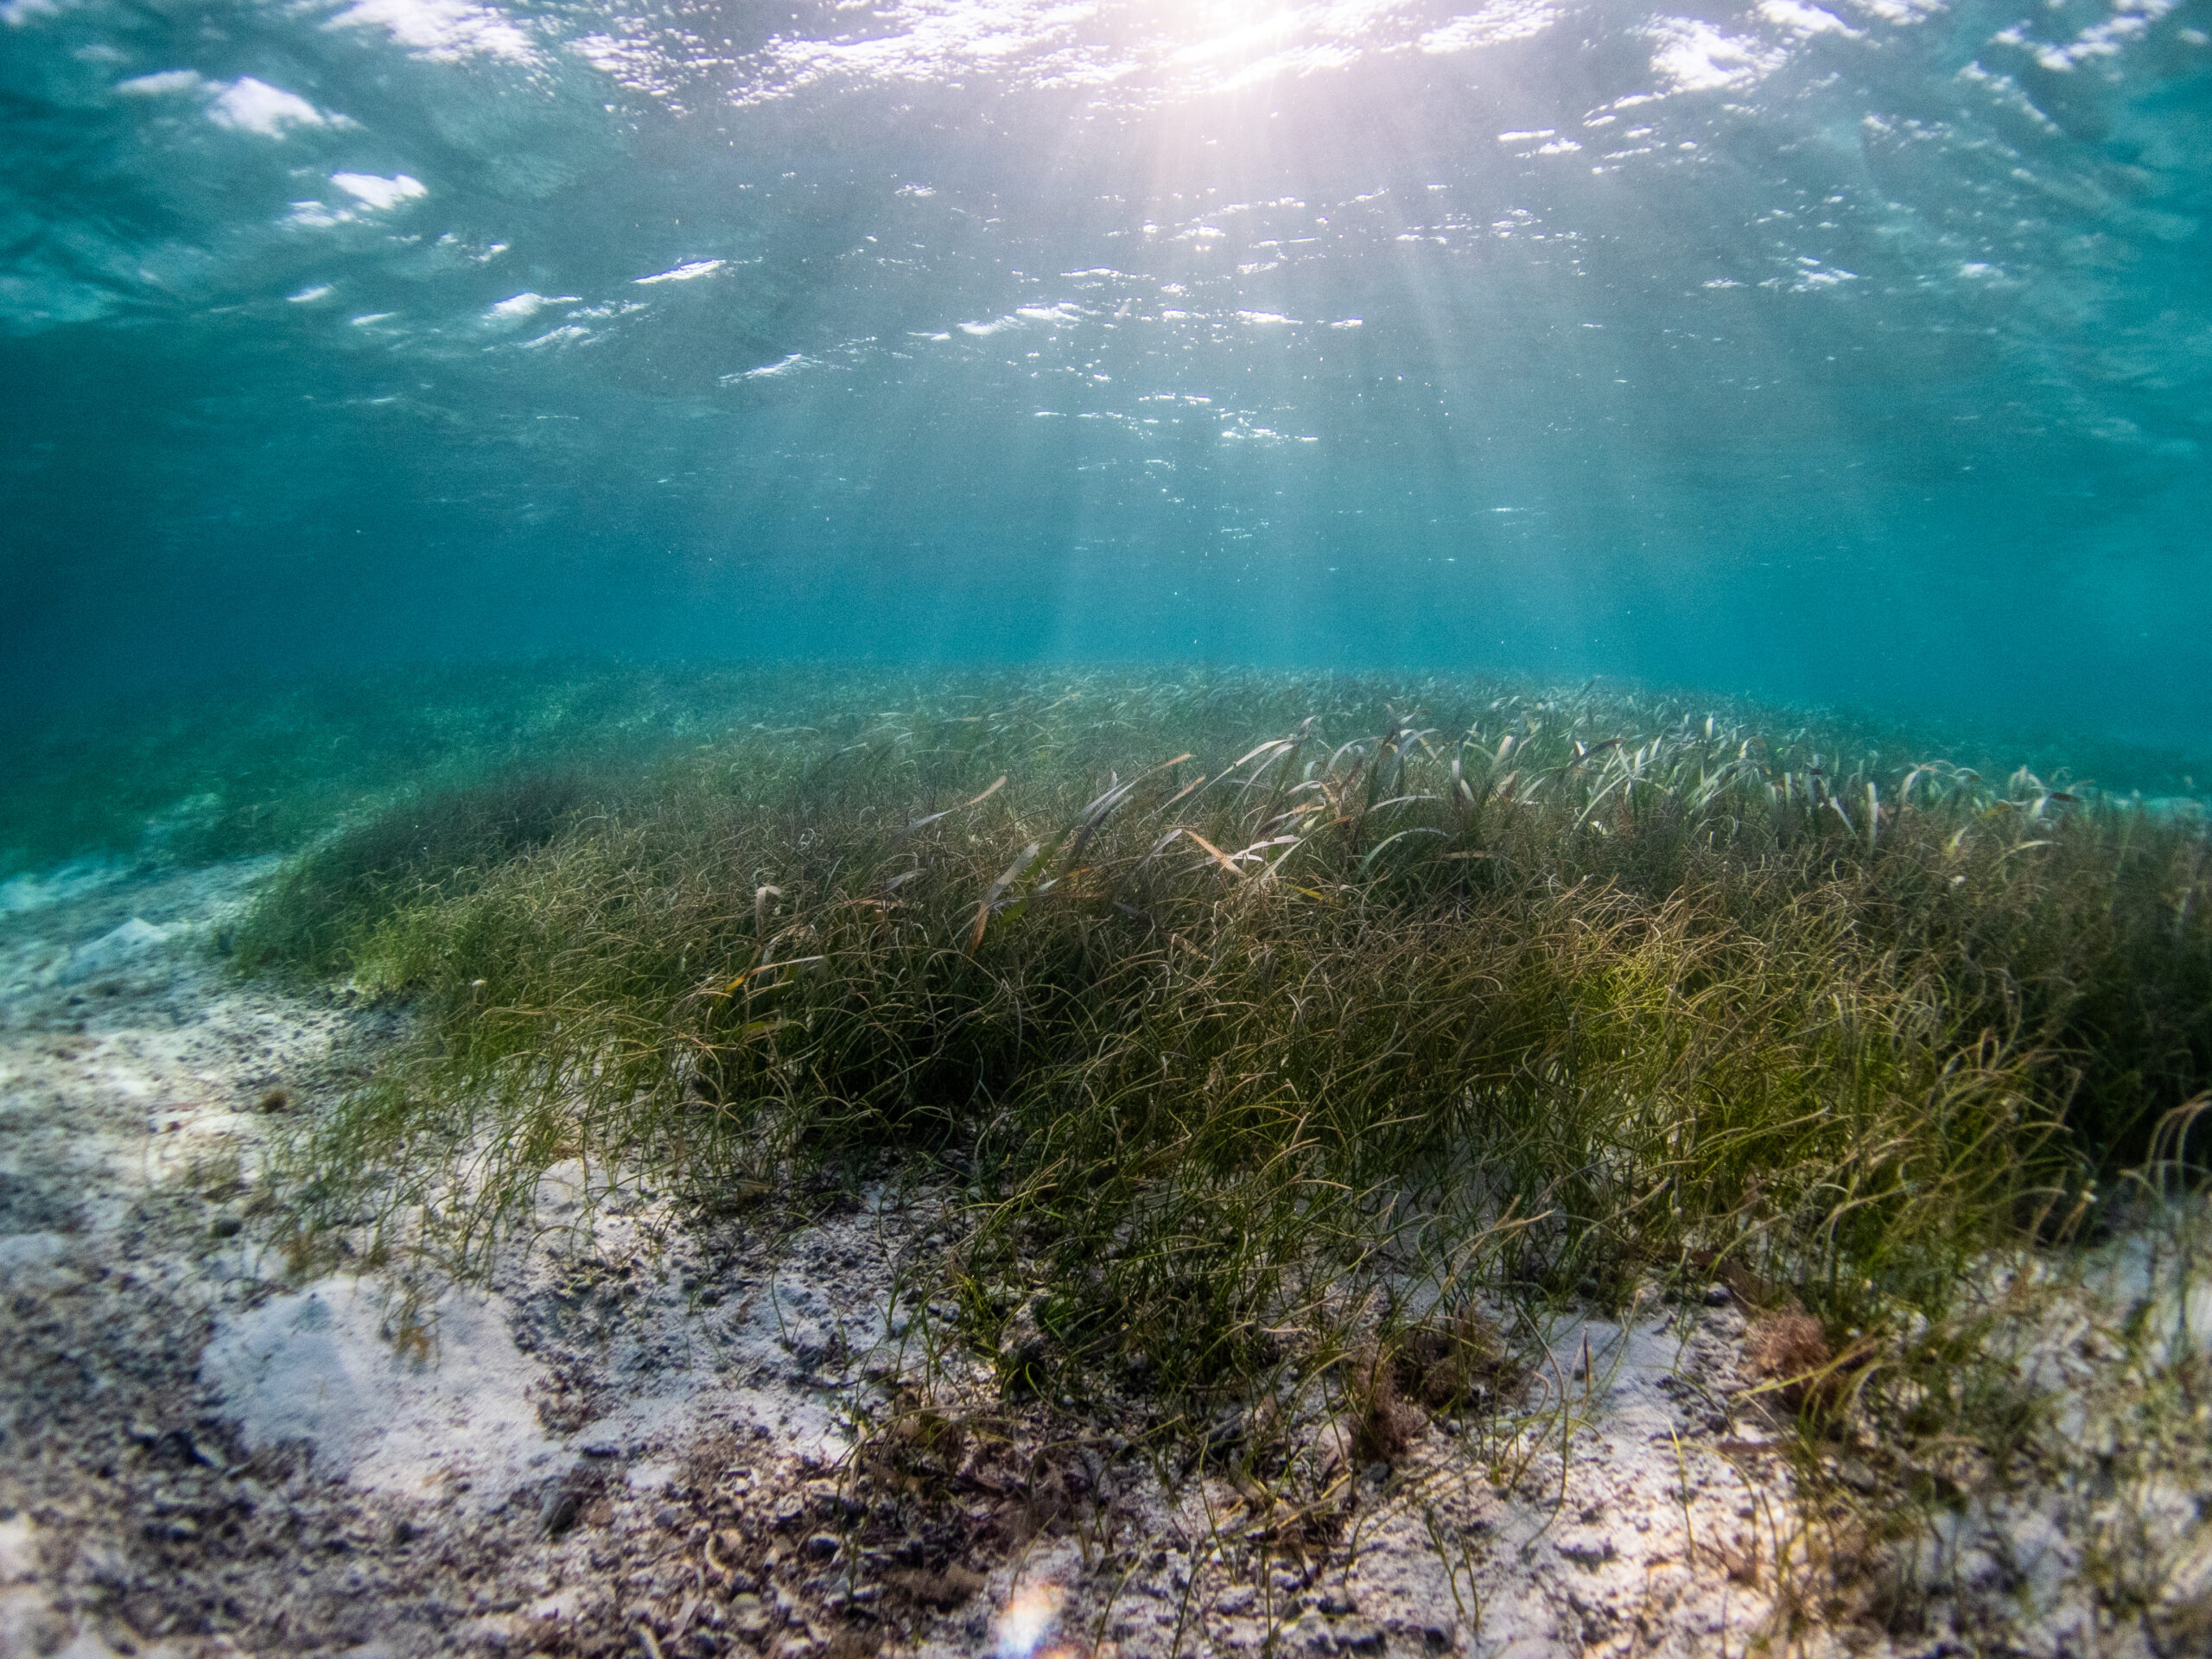 Seagrass production around artificial reefs is resistant to human stressors